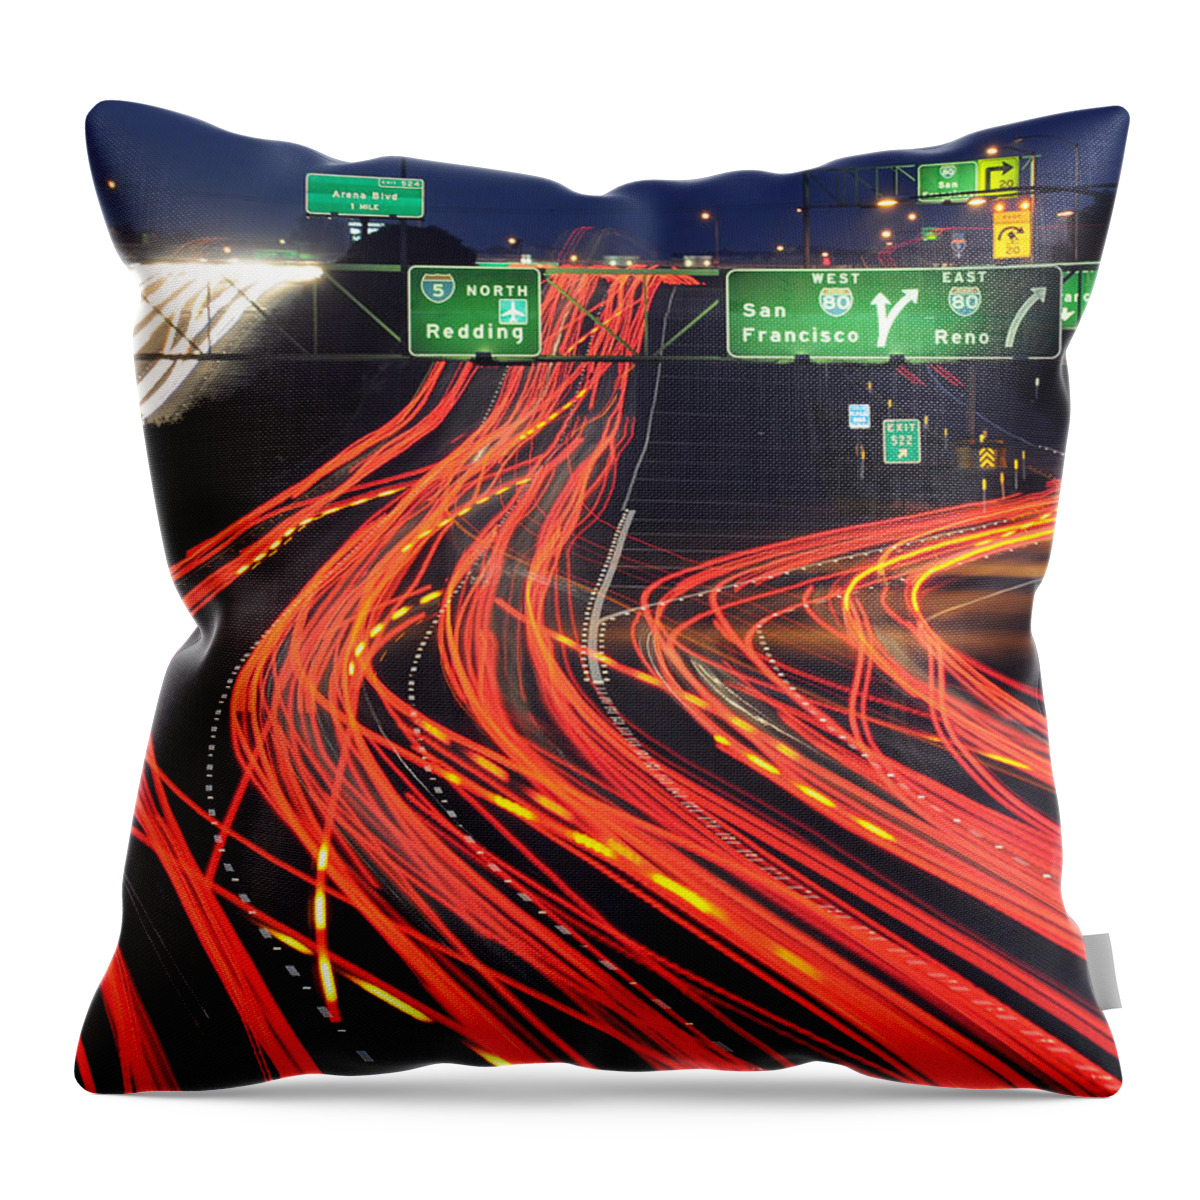 California Throw Pillow featuring the photograph Two Great Freeways by Mike Perry - Flickr.com/mrperry